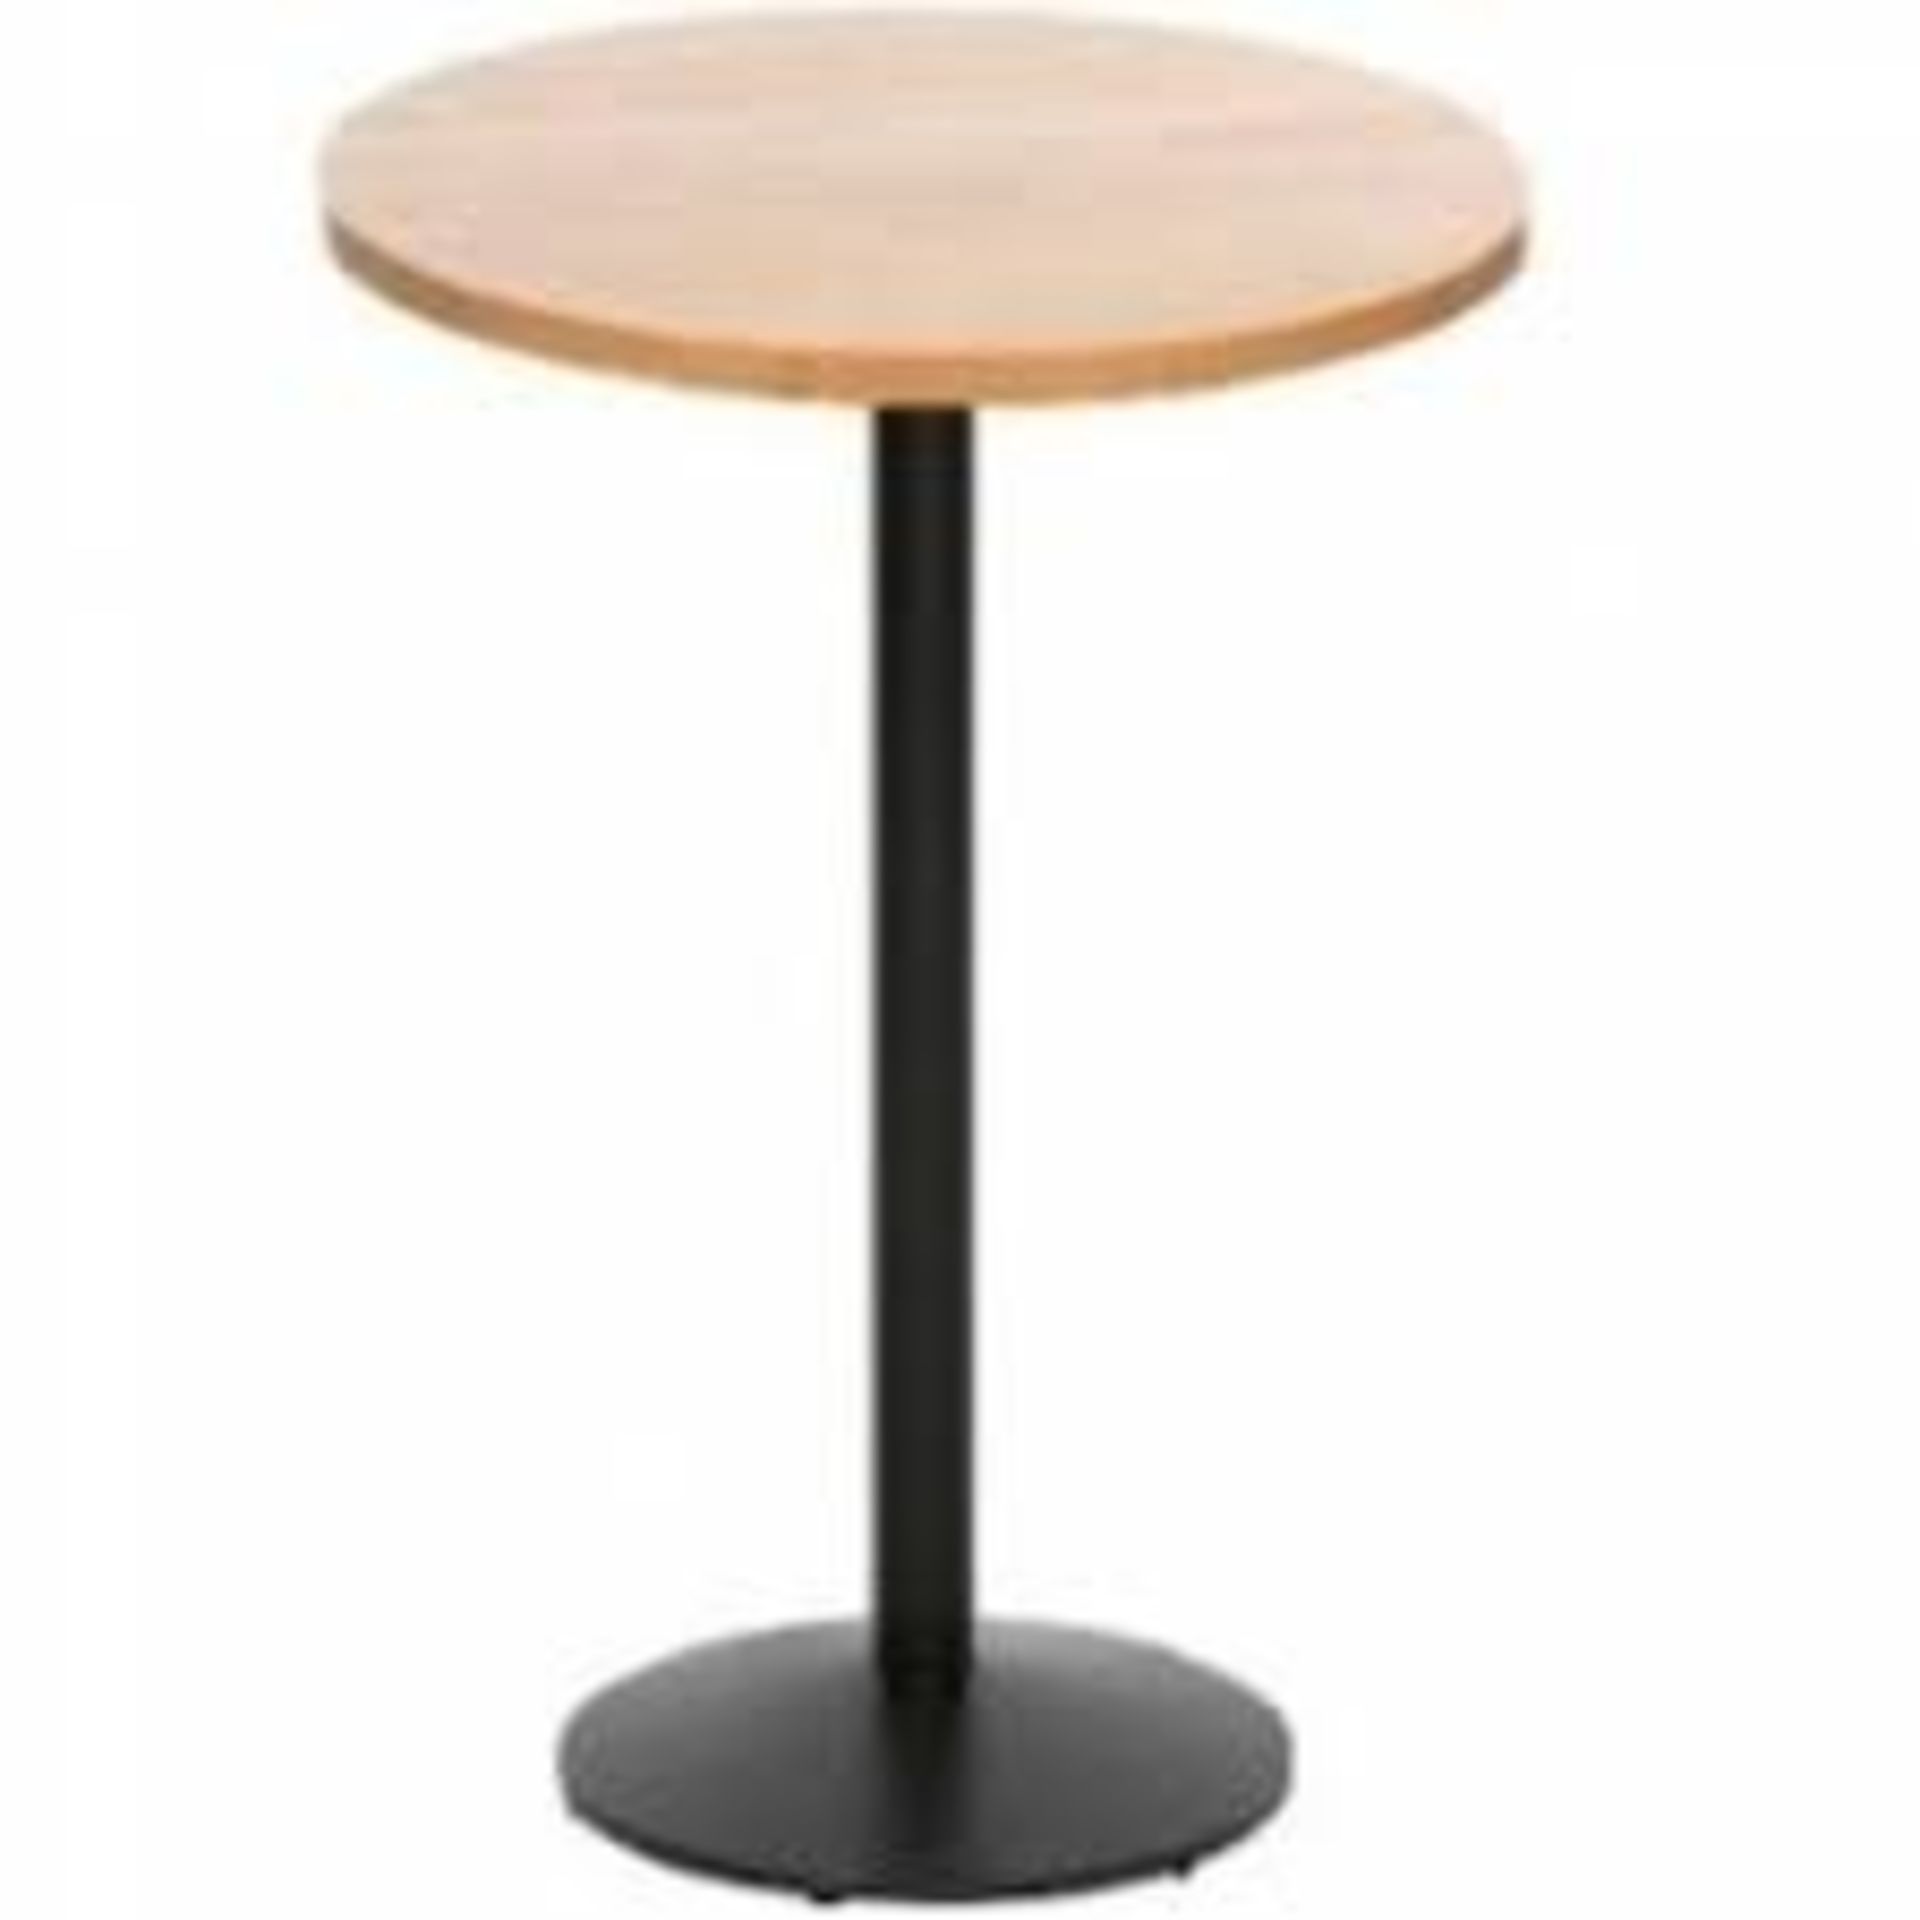 Boxed Oval Fixed Top Pedastal Tables In Natural